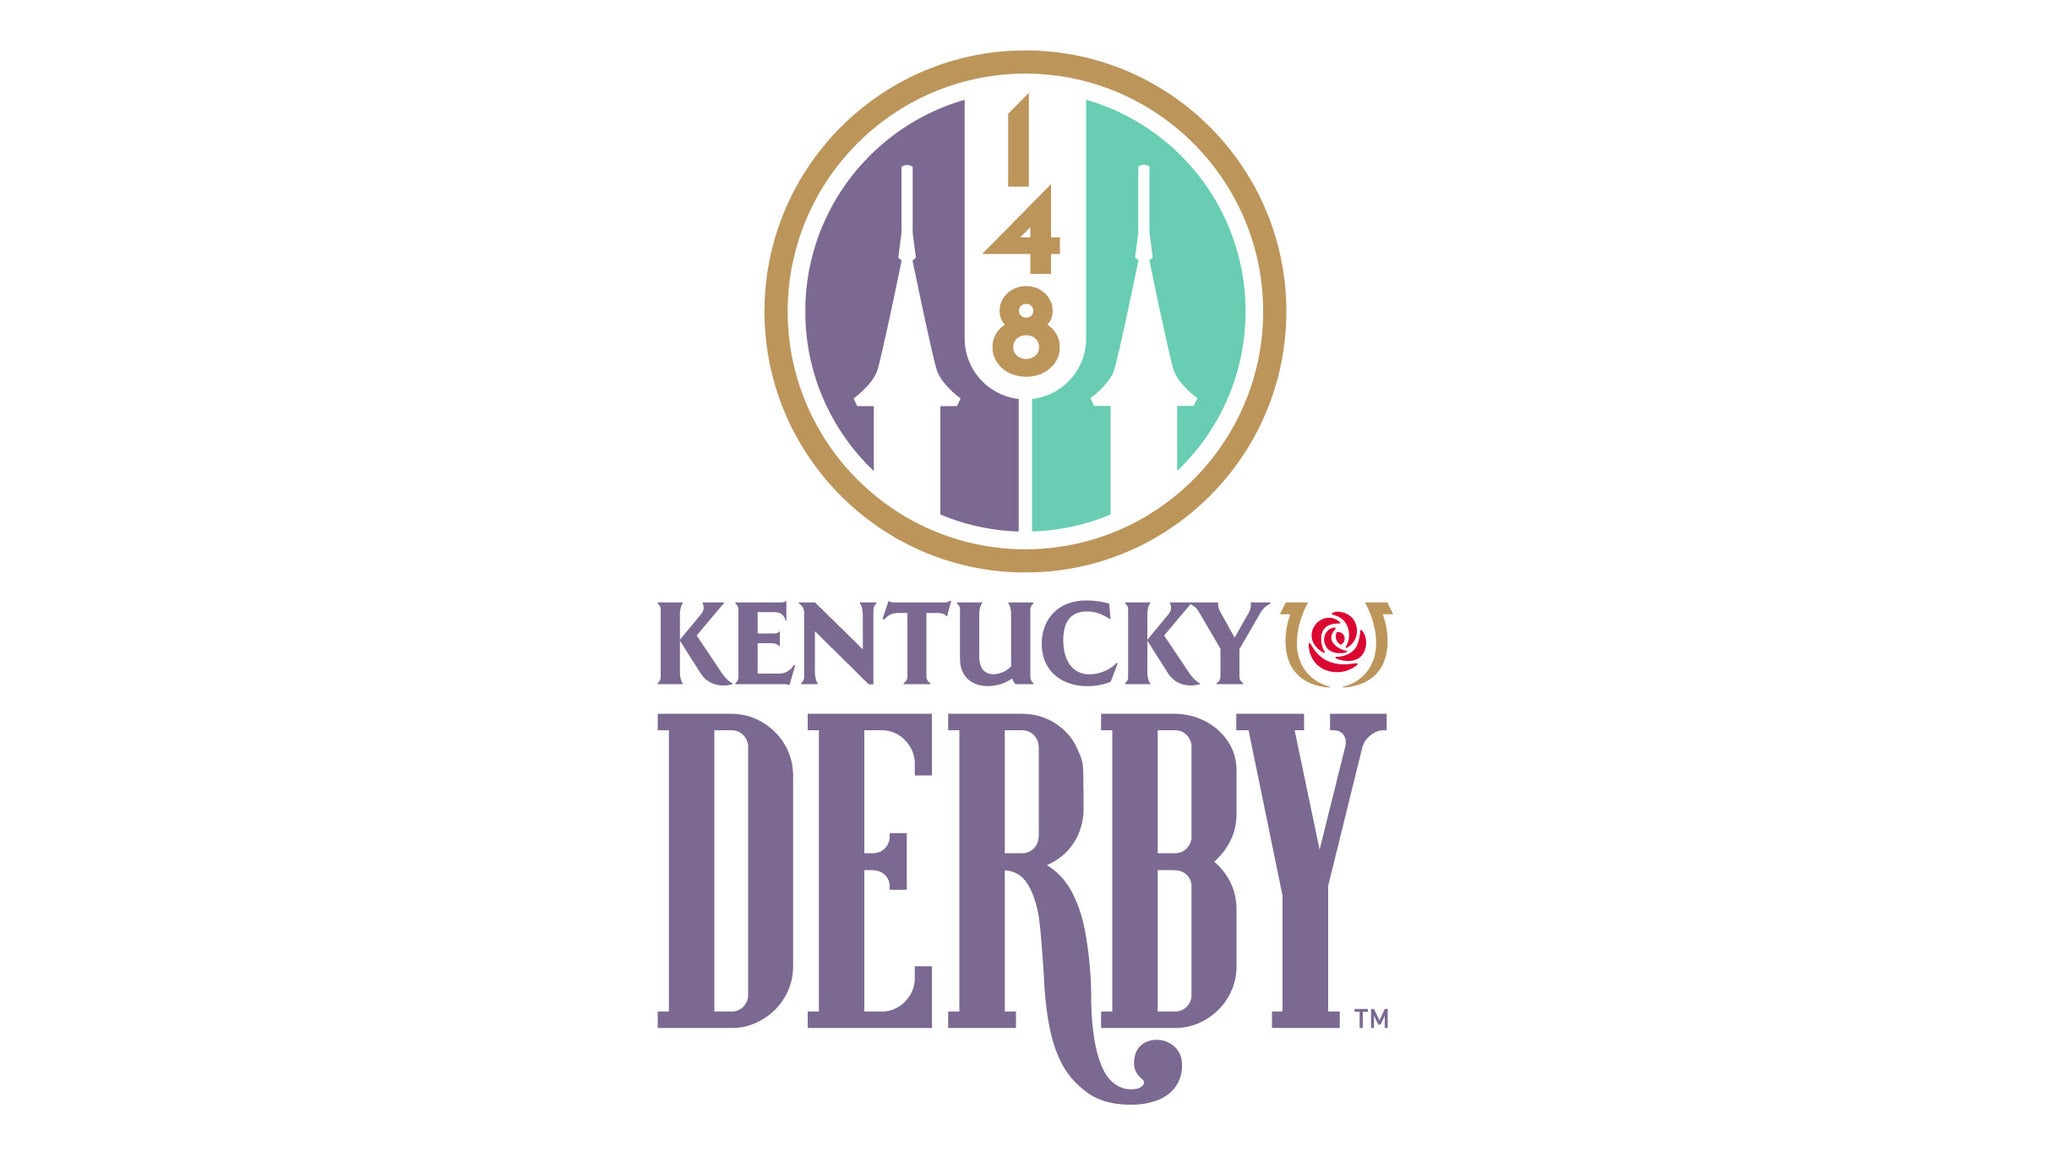 148th Kentucky Derby - Infield General Admission *No Front Side Access in Louisville promo photo for Early Bird Purchase Pricing presale offer code